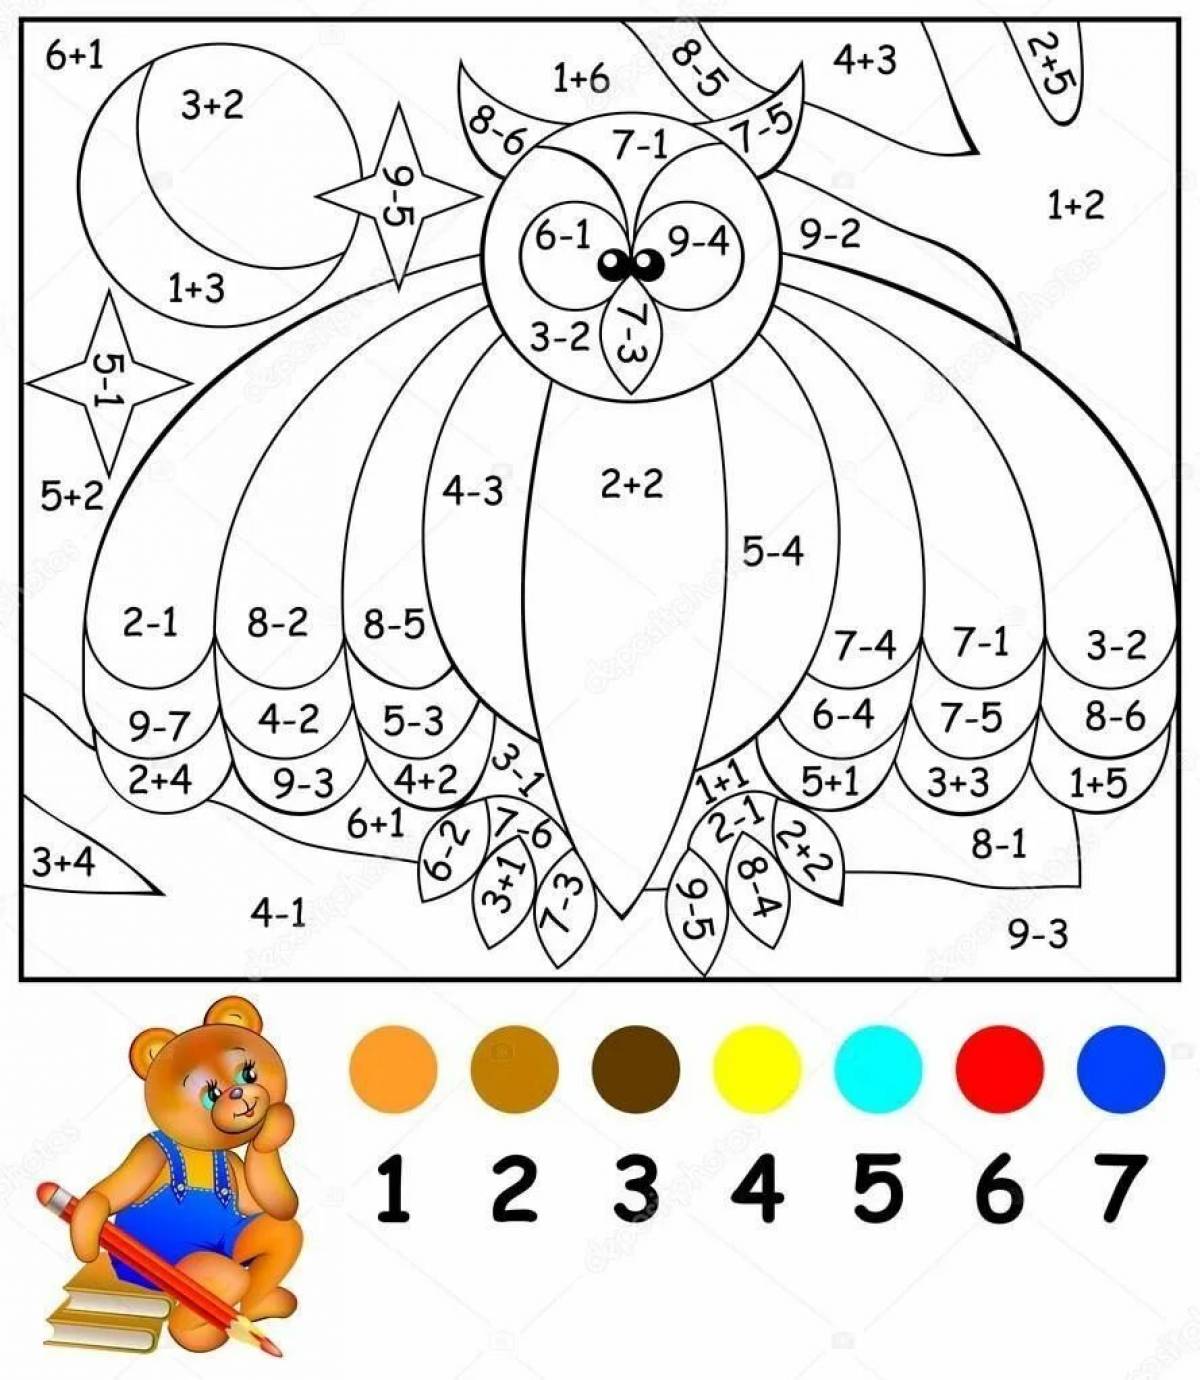 Color-glimmering grade 2 coloring page by numbers